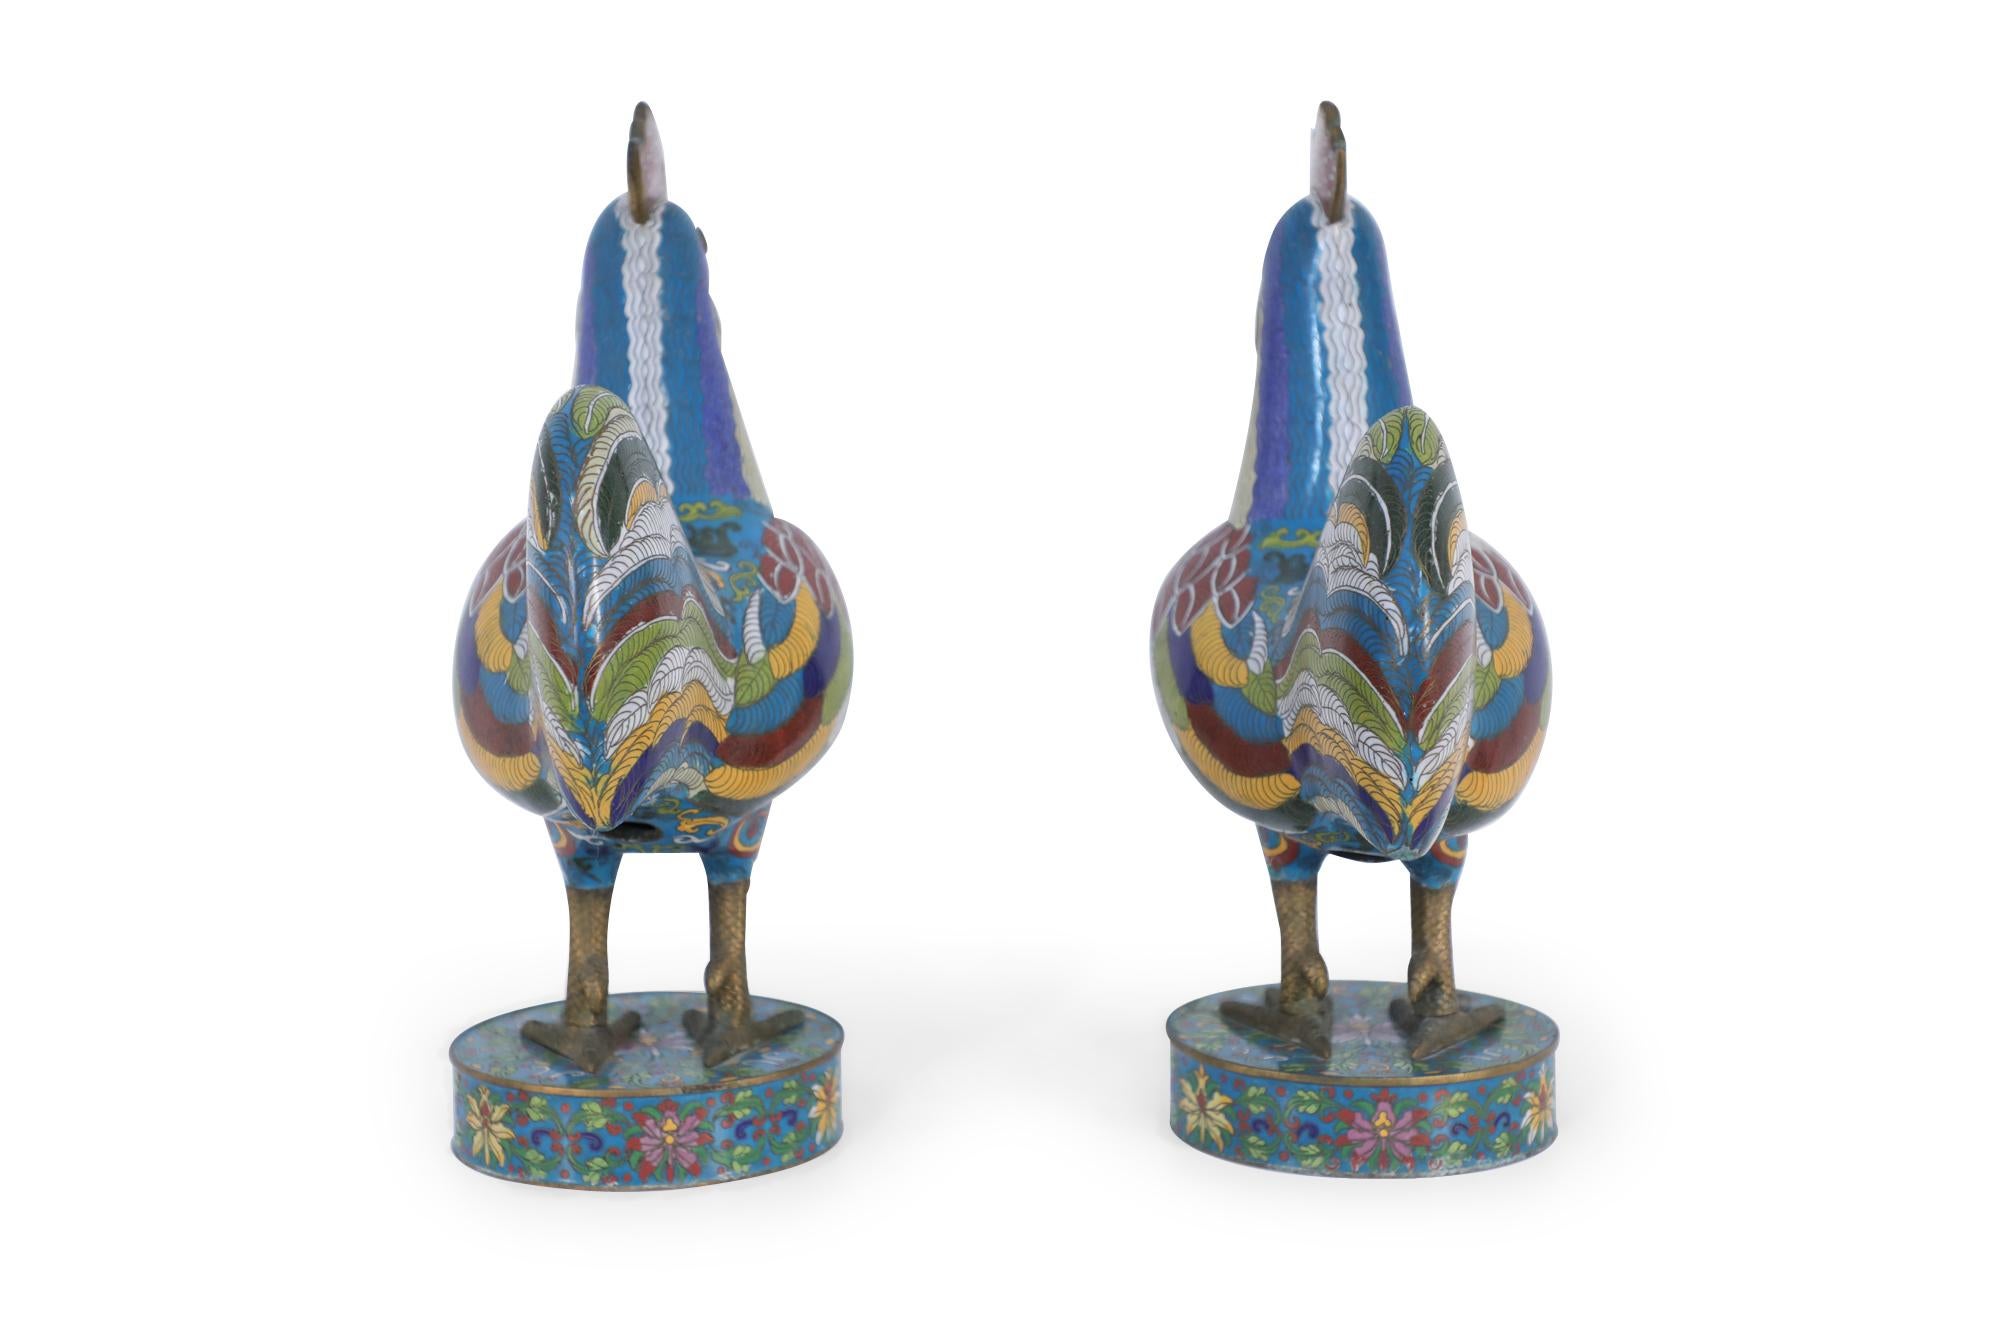 Pair of Early 20th Century Chinese Multi-Colored Cloisonne Rooster Sculptures For Sale 1